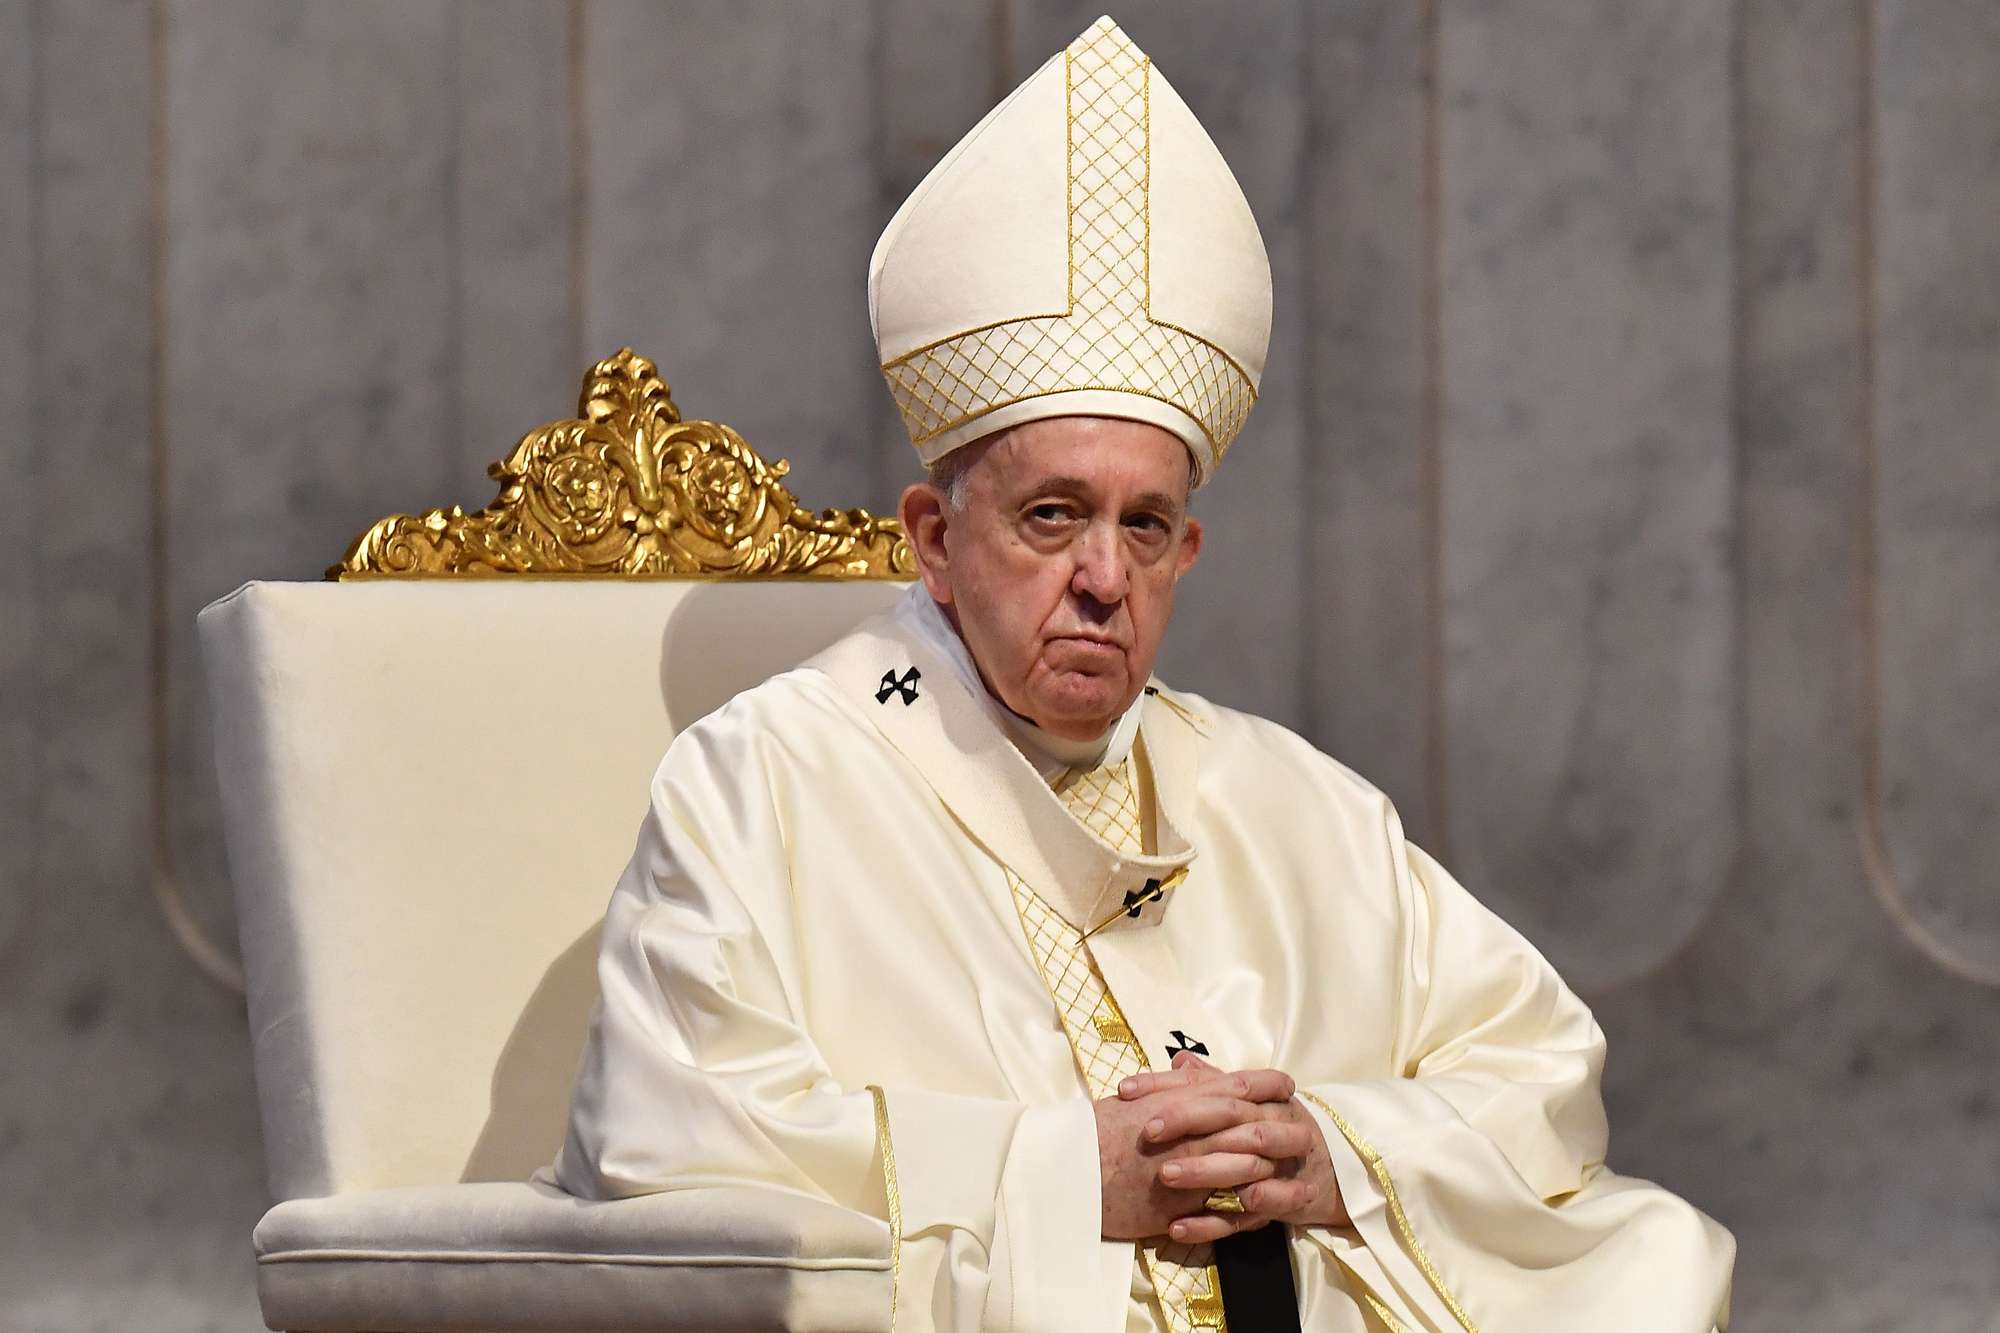 Pope Francis Apologizes Following Reports of Him Saying Offensive Term Towards Gay People